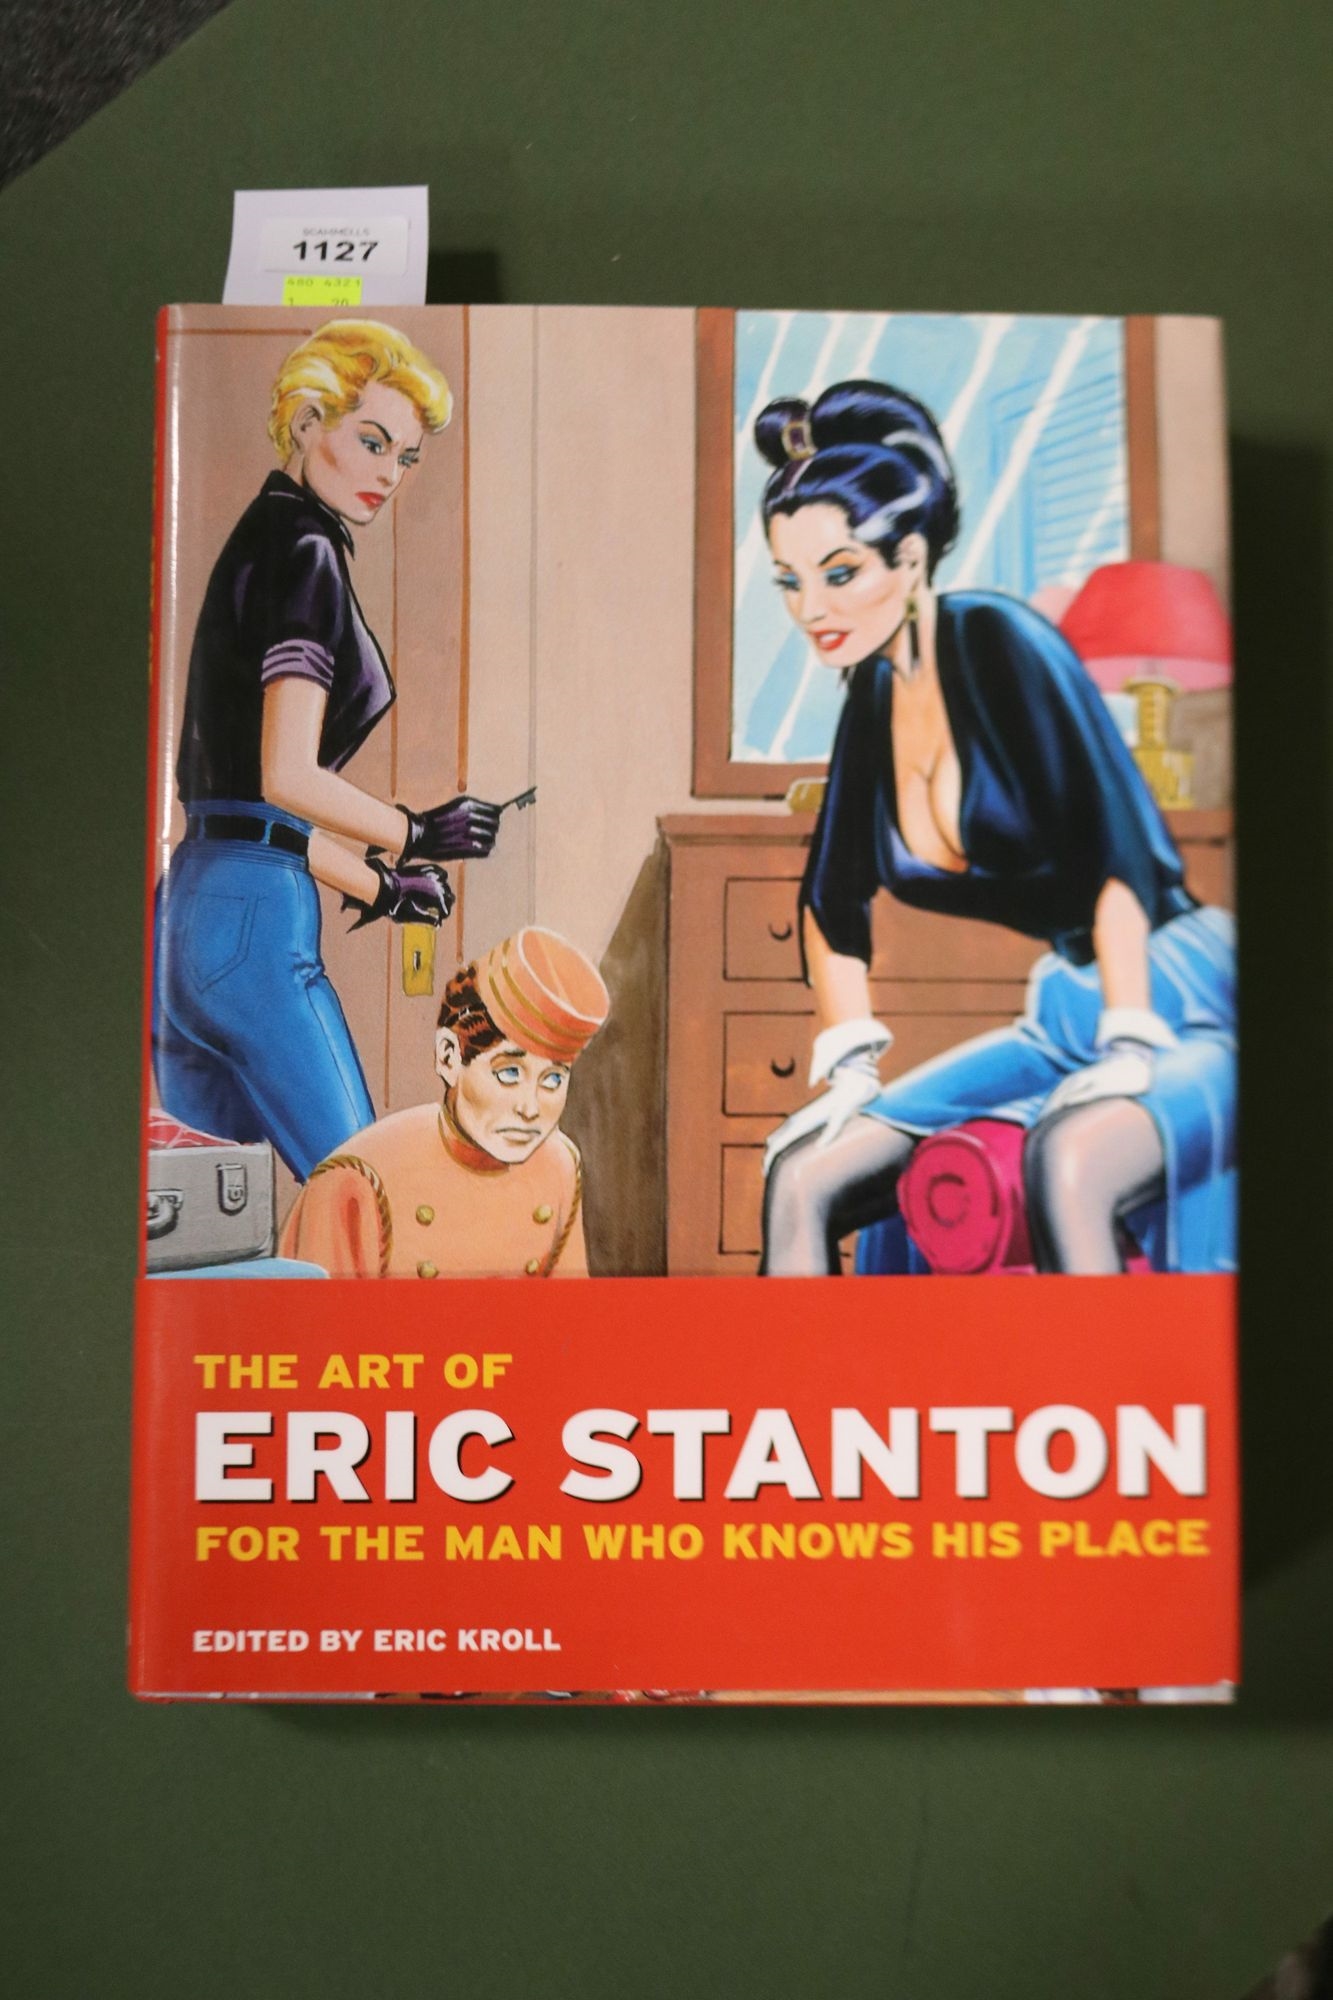 Artwork by Eric Stanton, The Art of Eric Stanton - for the Man who knows his Place. Taschen